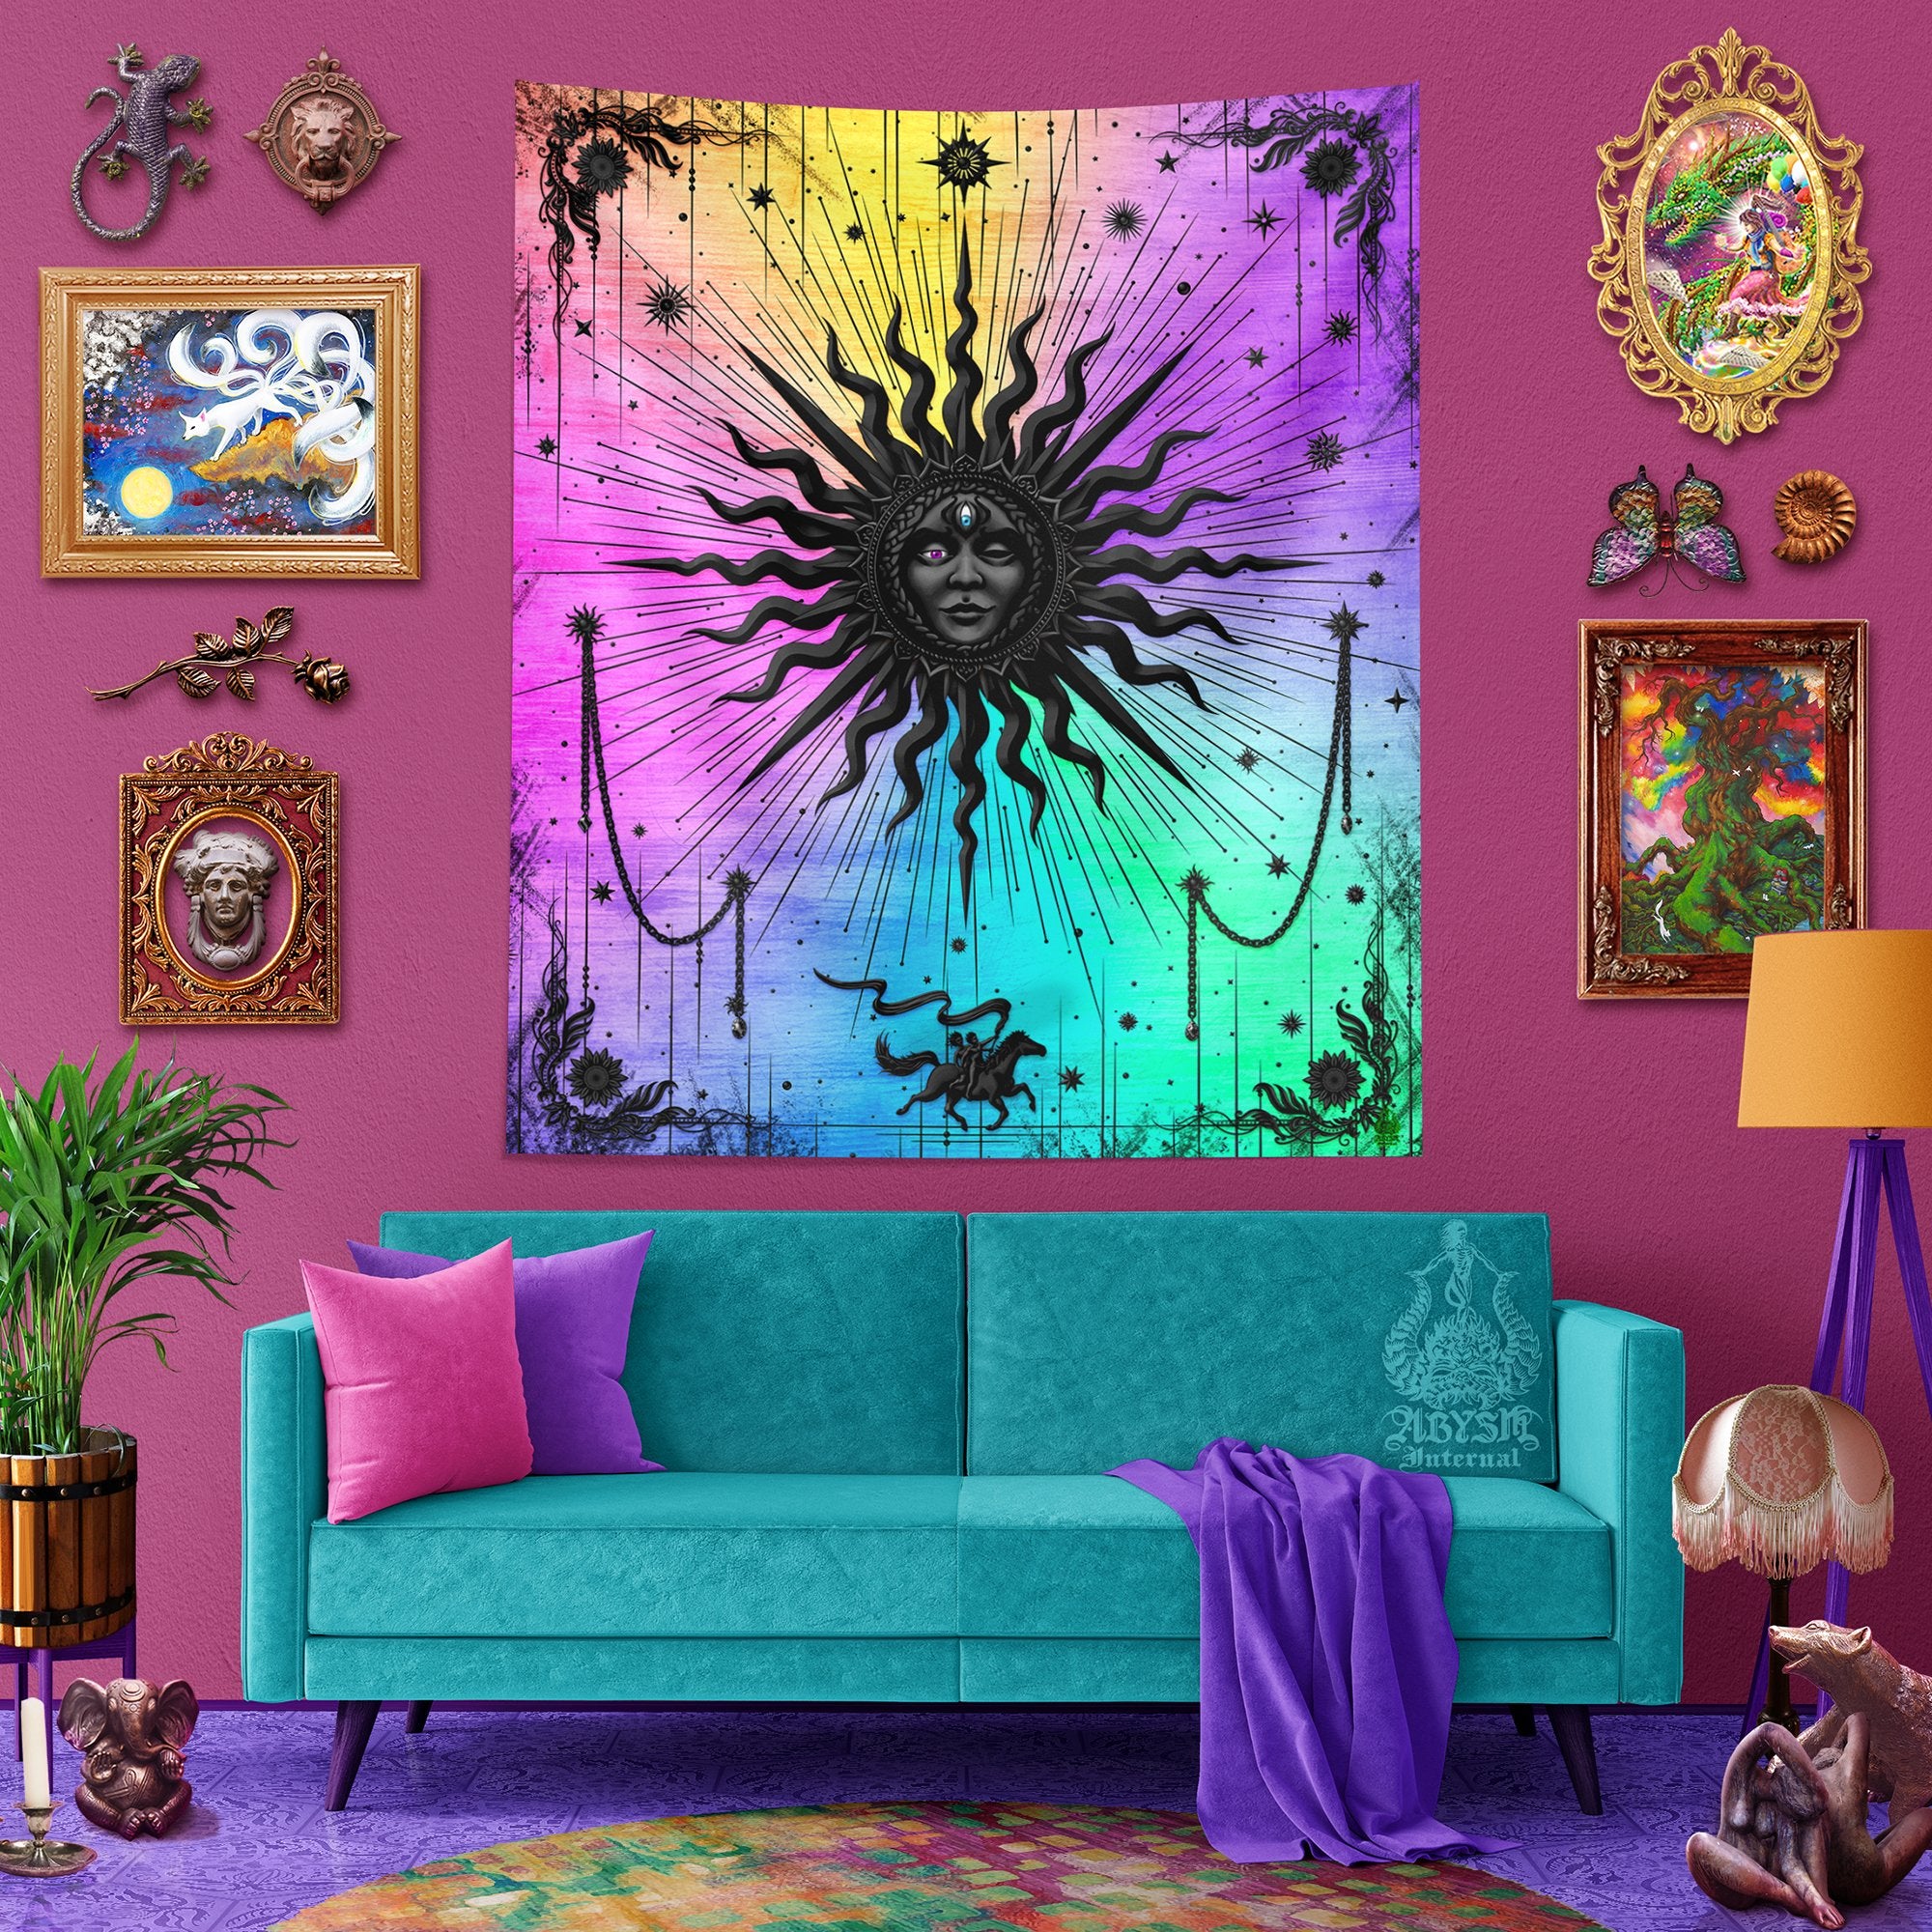 Psychedelic Sun Tapestry, Trippy Tarot Card Arcana Wall Hanging, Magic and Esoteric Art, Boho and Indie Home Decor, Vertical Print - Pastel Black - Abysm Internal